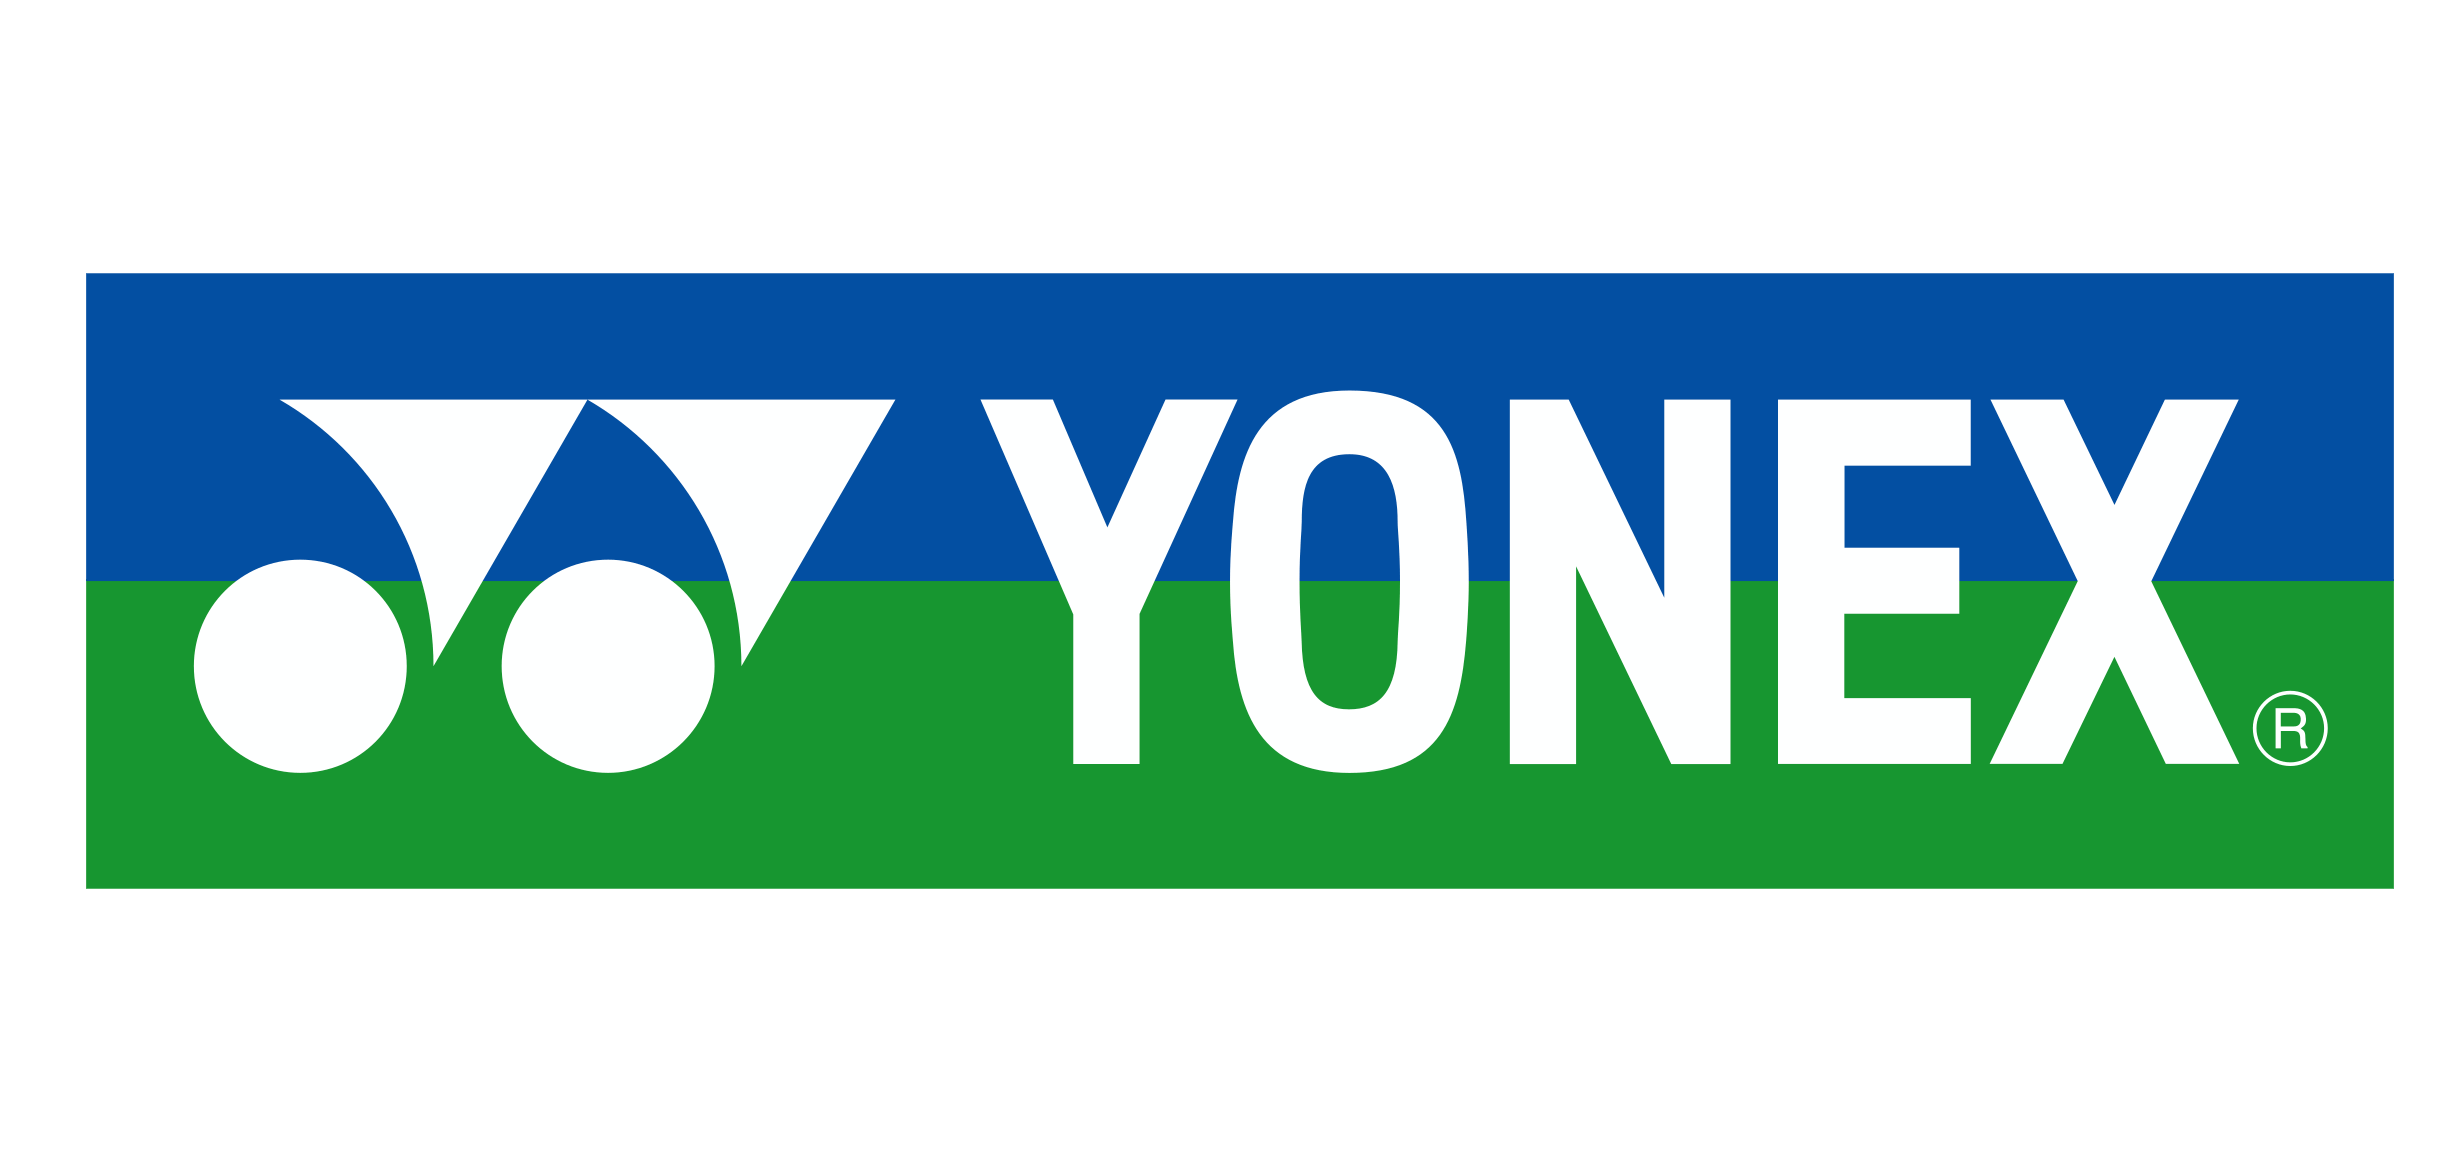 The Yonex logo reads "Yonex" in white text on a split blue and green background.